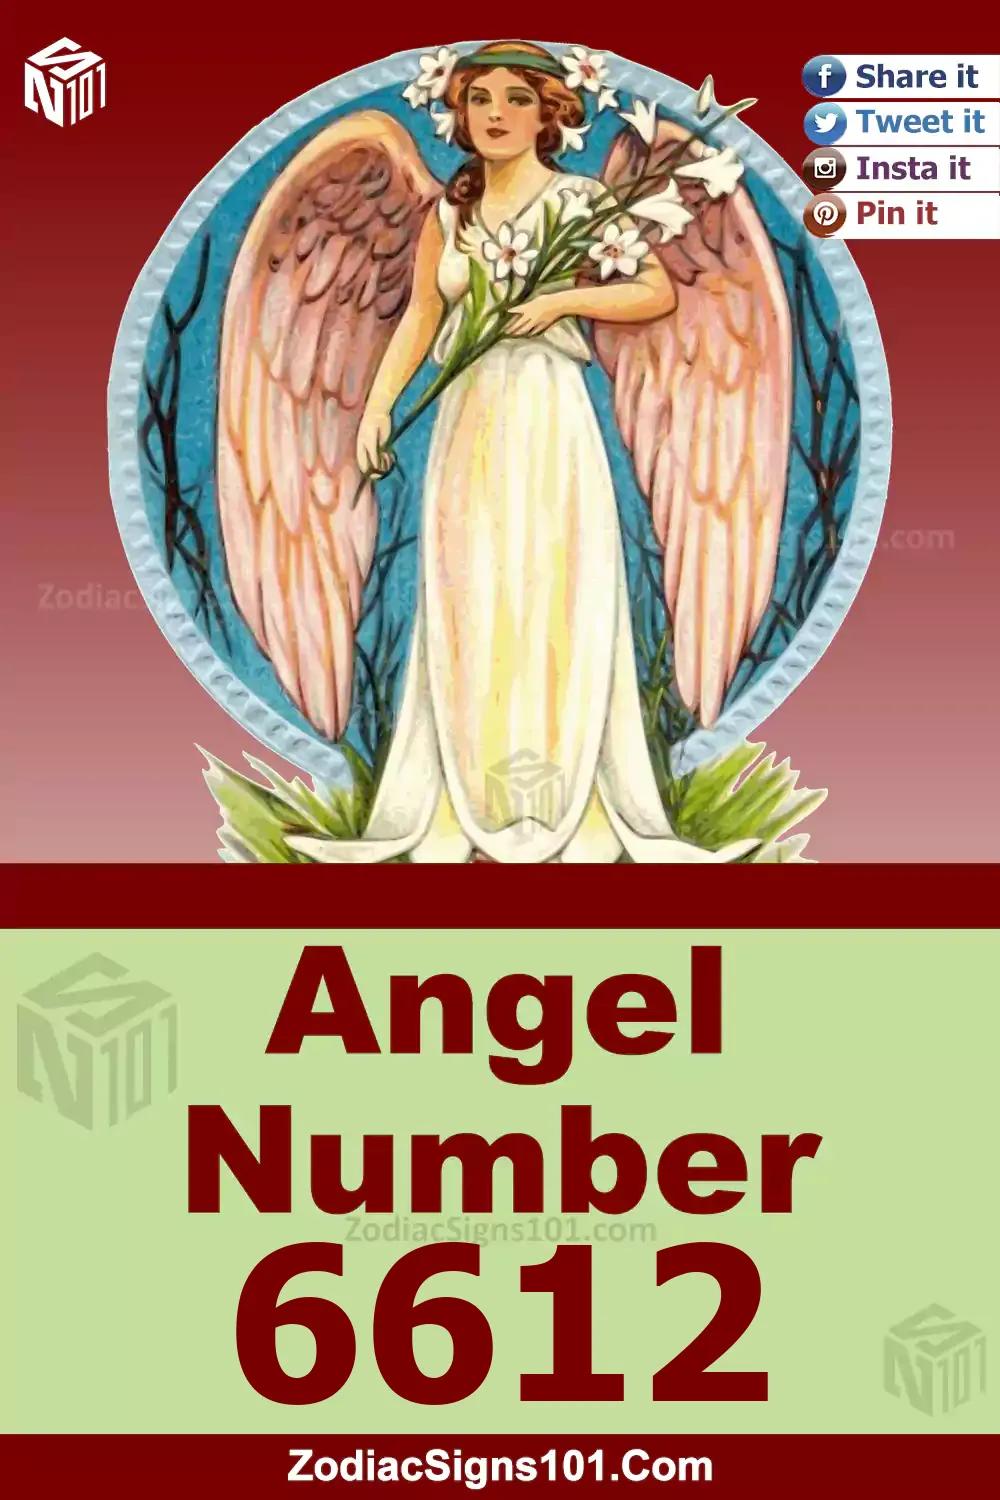 6612 Angel Number Meaning